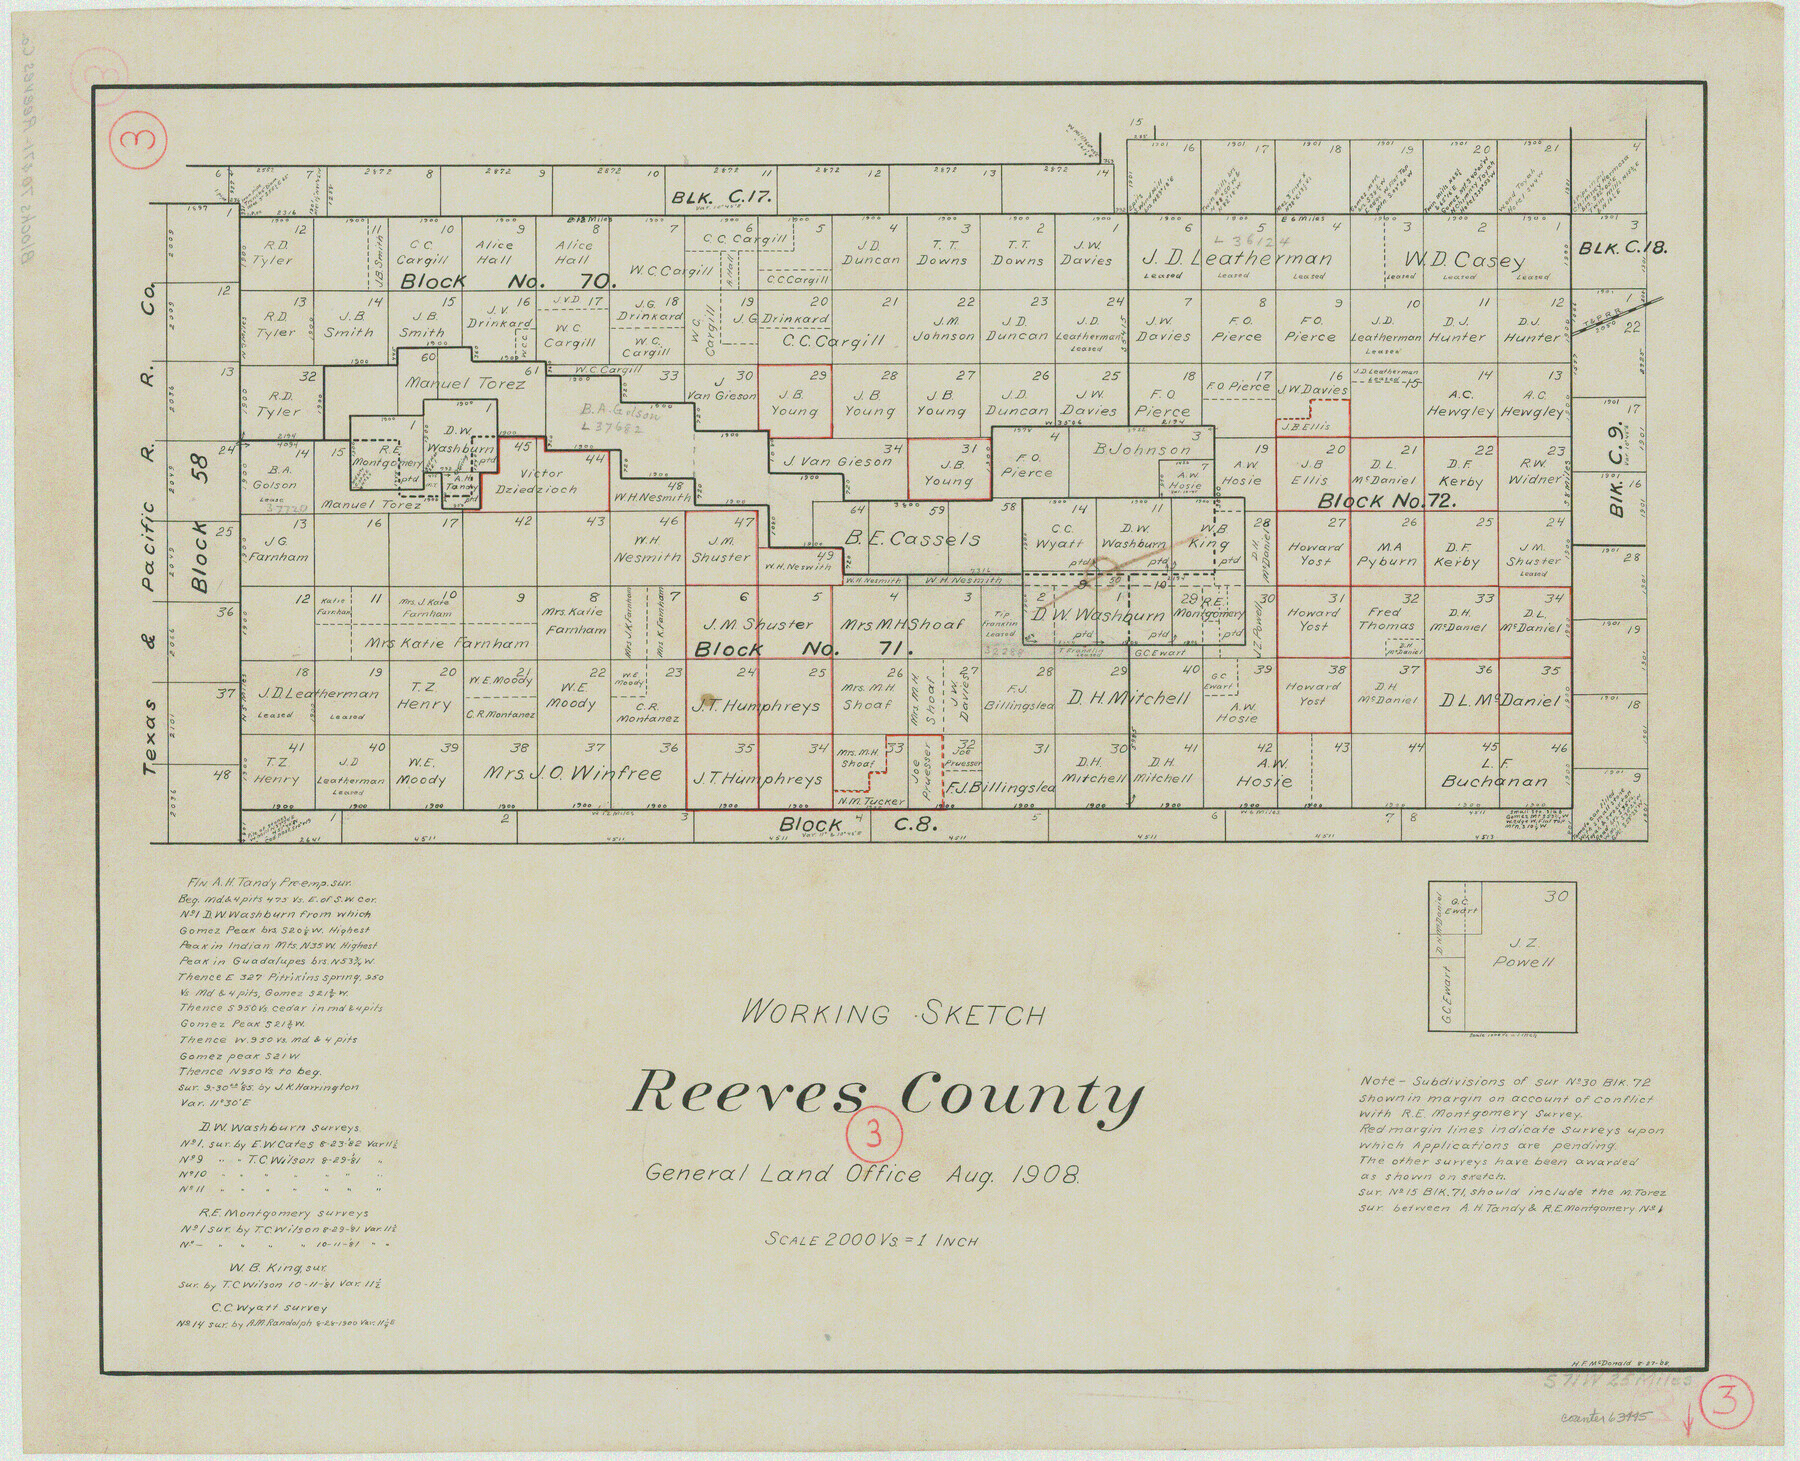 63445, Reeves County Working Sketch 3, General Map Collection